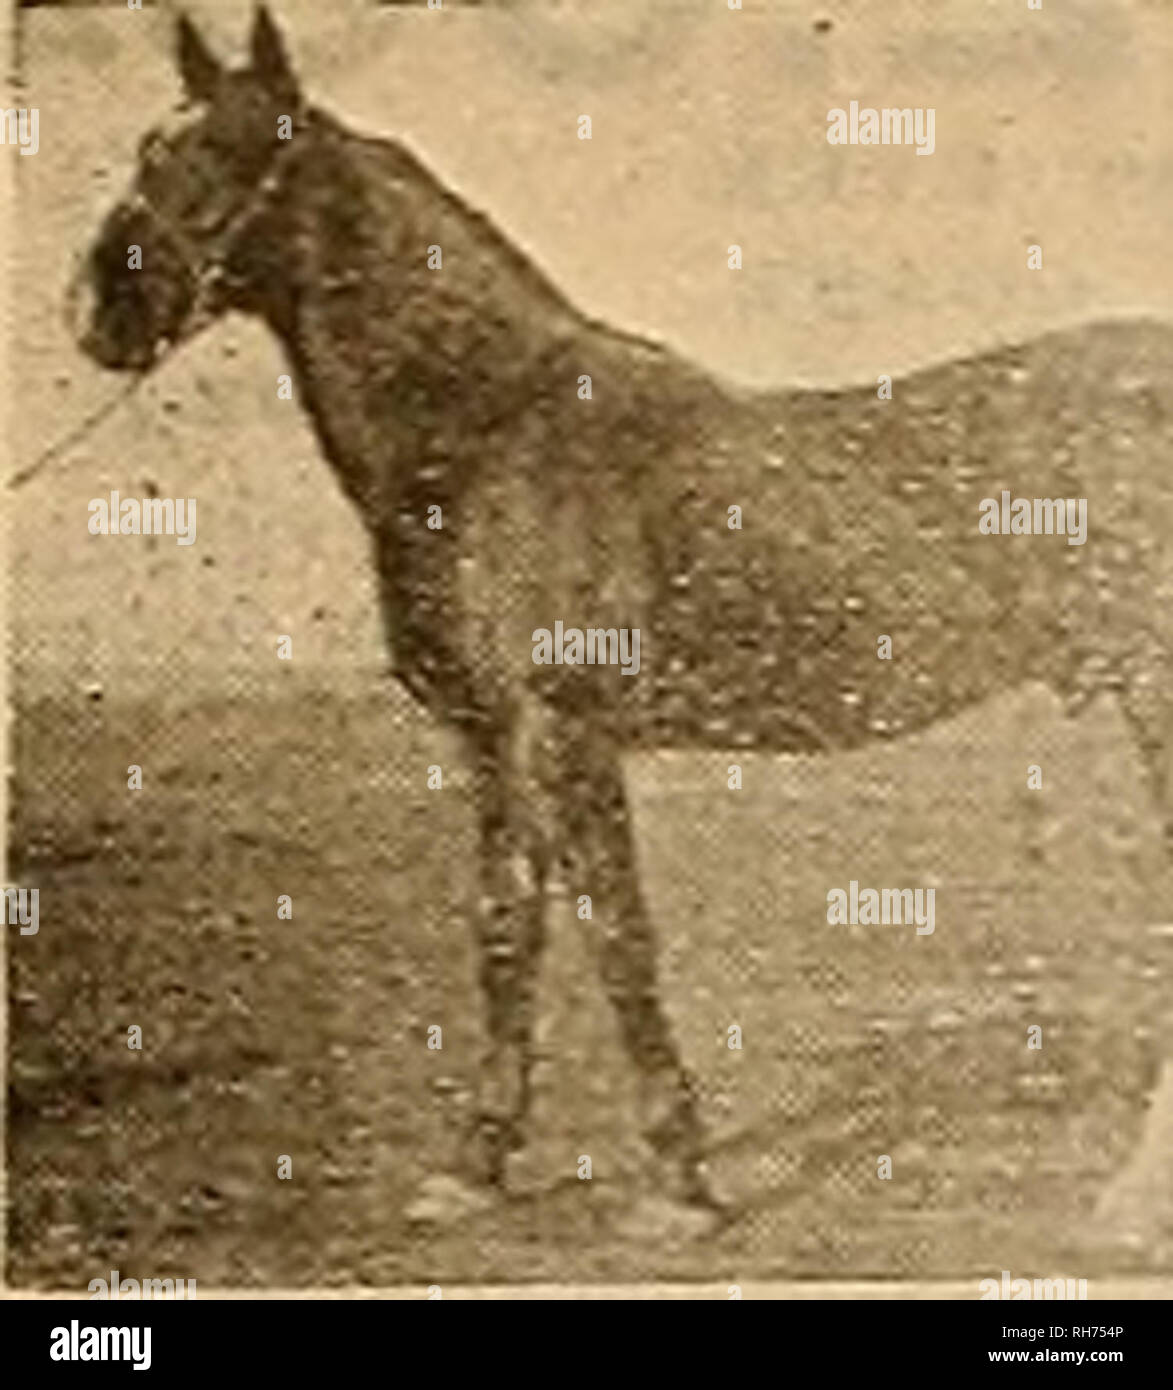 . Breeder and sportsman. Horses. March 21. 19031 ©he Qxesftev trnii gpjwtrtemcm 17. Sire of Frank 2:10!4 Sweltzer 2:13&gt;- 2d dam BLANCHWARD by Onward (Sire 9 in 2:10 list, 27 in 2:15 list) 3d dam BLANCHE PATCHEN by Mambrino Patchen 58 (greatest broodmare sire) 4th dam LADYBLANCHE by Hough ton's Privateer 258 5th dam JENNY LEND by Abdal- lah 15 s^SPEED AND ABILITY TO REPRODUCE IT.&quot;« DIABLO 2:09 1-4 SIR ALBERT S 2:03 3 4 CLIPPER 2:06 DIODINE 2:10 1-4 Daedalion 2:11, Diawood 2:11. El Di3blo 2:11, T3ss2:ll'&lt;, Hijo del Diablo !:ll'i I-r 't&lt;i Diablita2:l5M, Gatl Topsail 2:16. Imp2:19'f, Stock Photo